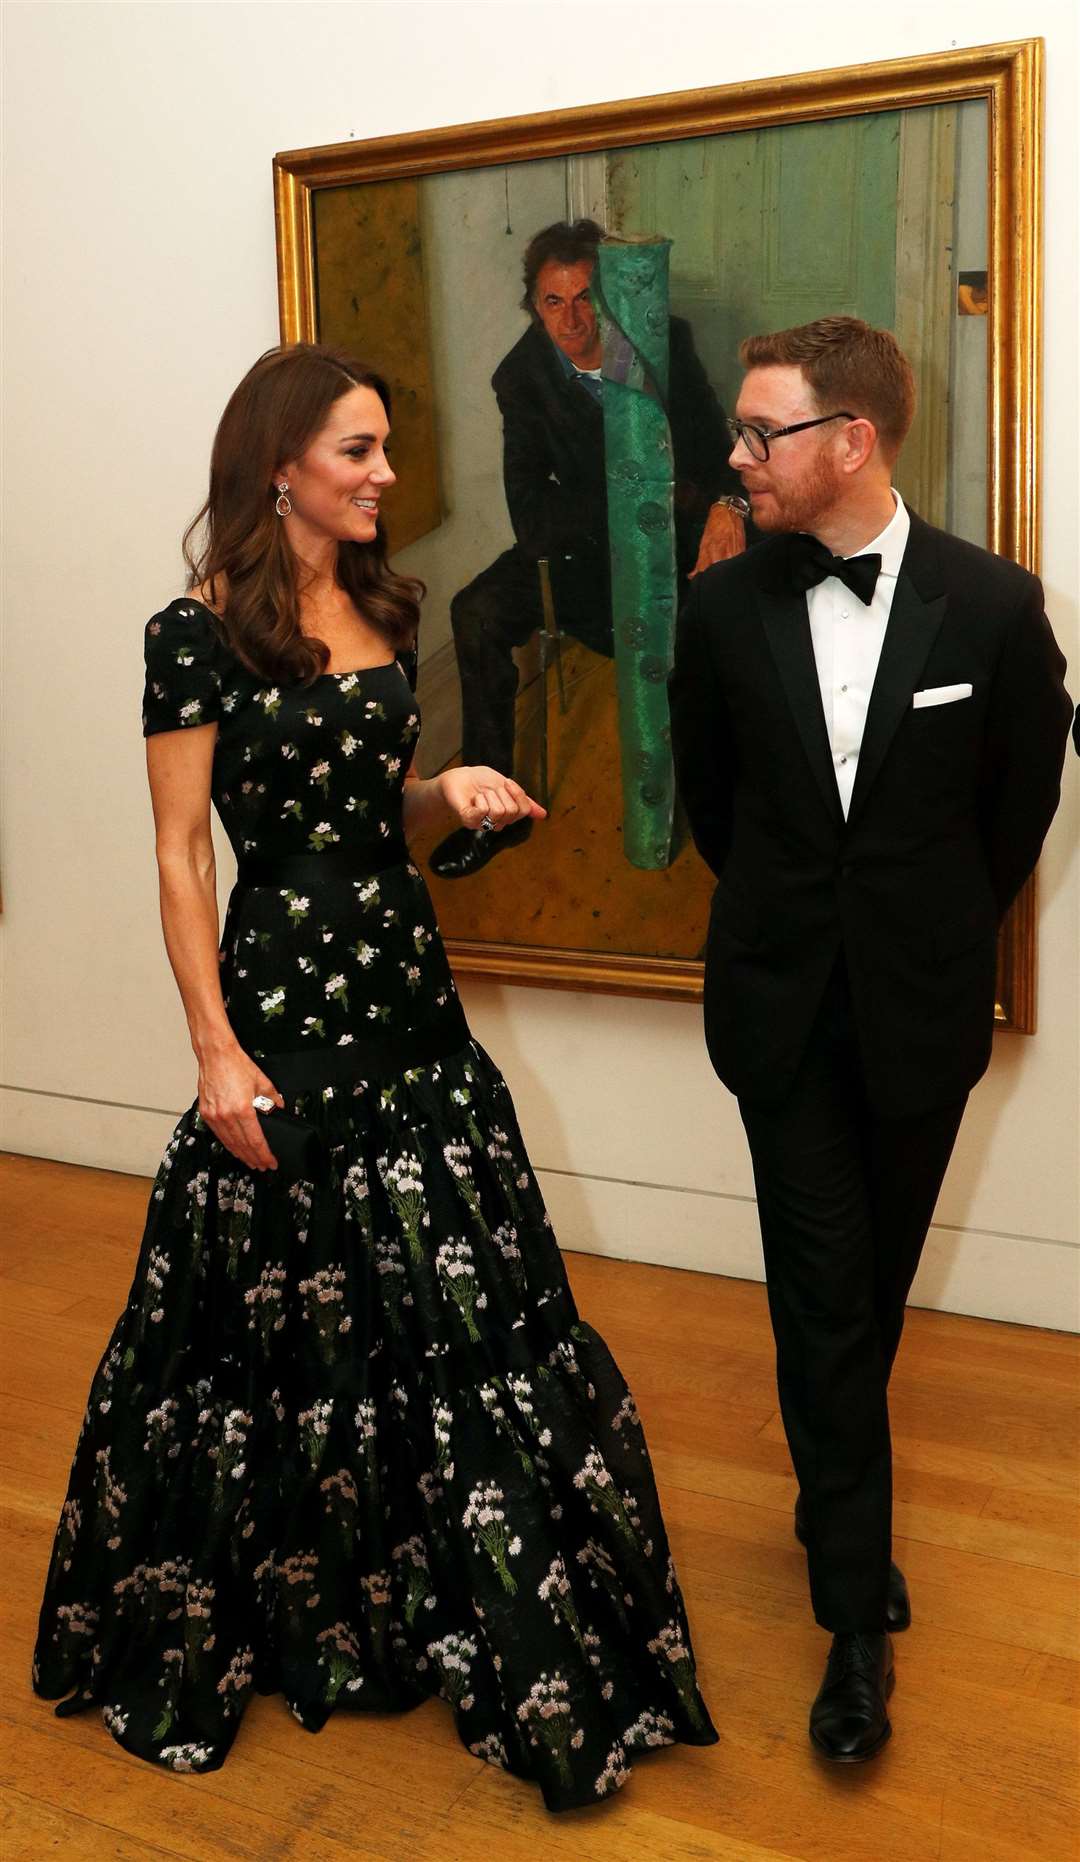 The then-Princess of Wales with Nicholas Cullinan at the National Portrait Gallery (John Sibley/PA)